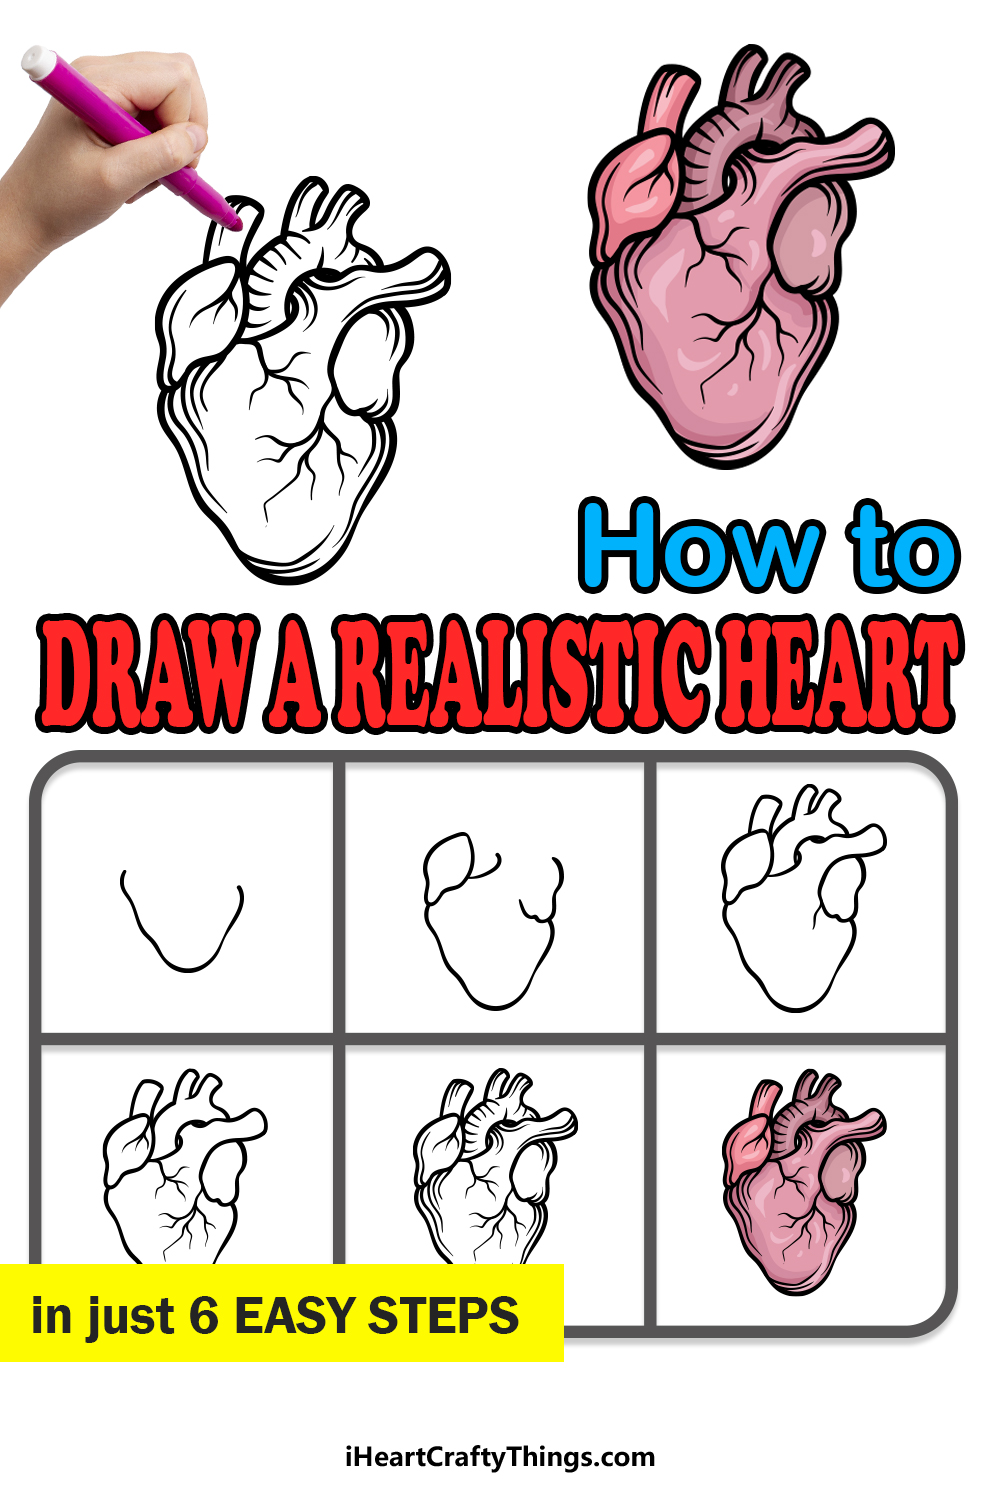 how to draw a realistic heart in 6 easy steps